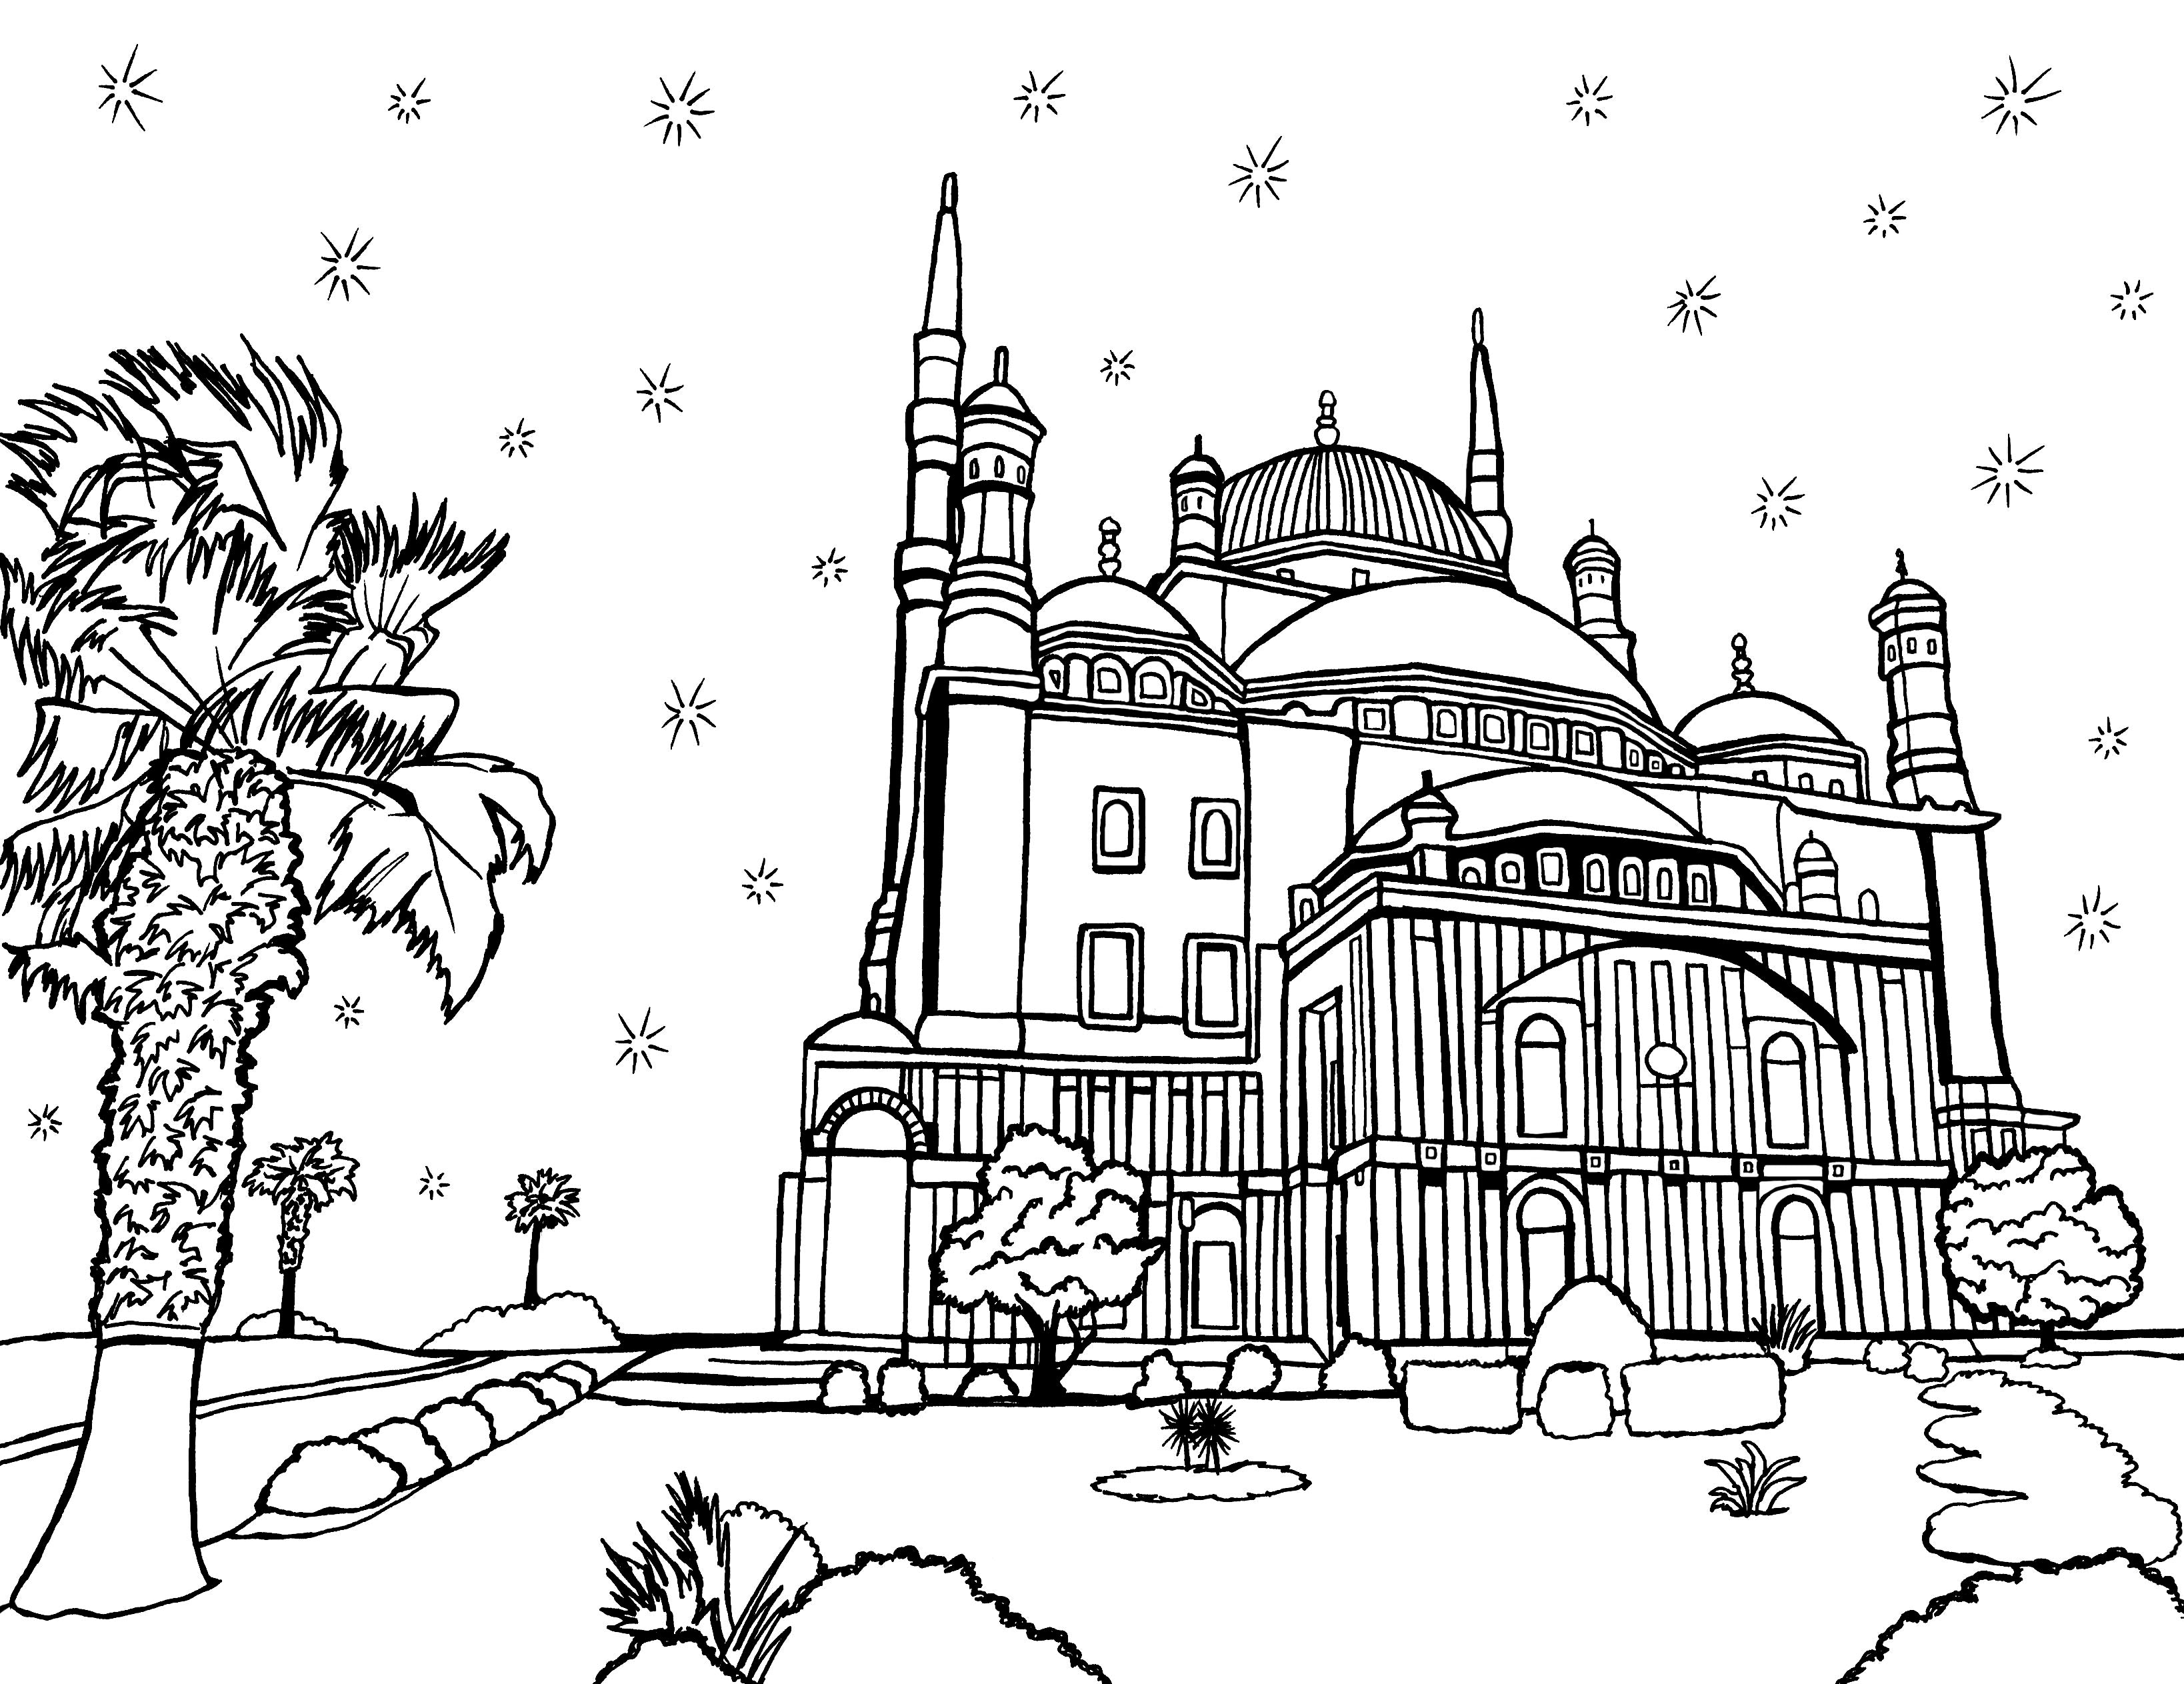 A detailed black and white coloring page depicting the Mosque of Muhammad Ali, also known as the Alabaster Mosque, situated on the Citadel of Cairo, Egypt. The illustration presents a panoramic view of the mosque with its towering minarets, ornate domes, and arched windows. Palm trees sway gently in the foreground, adding a serene natural element to the scene.  This intricate line art invites adults to engage in coloring for relaxation and cultural exploration. Free coloring page :: You-Color